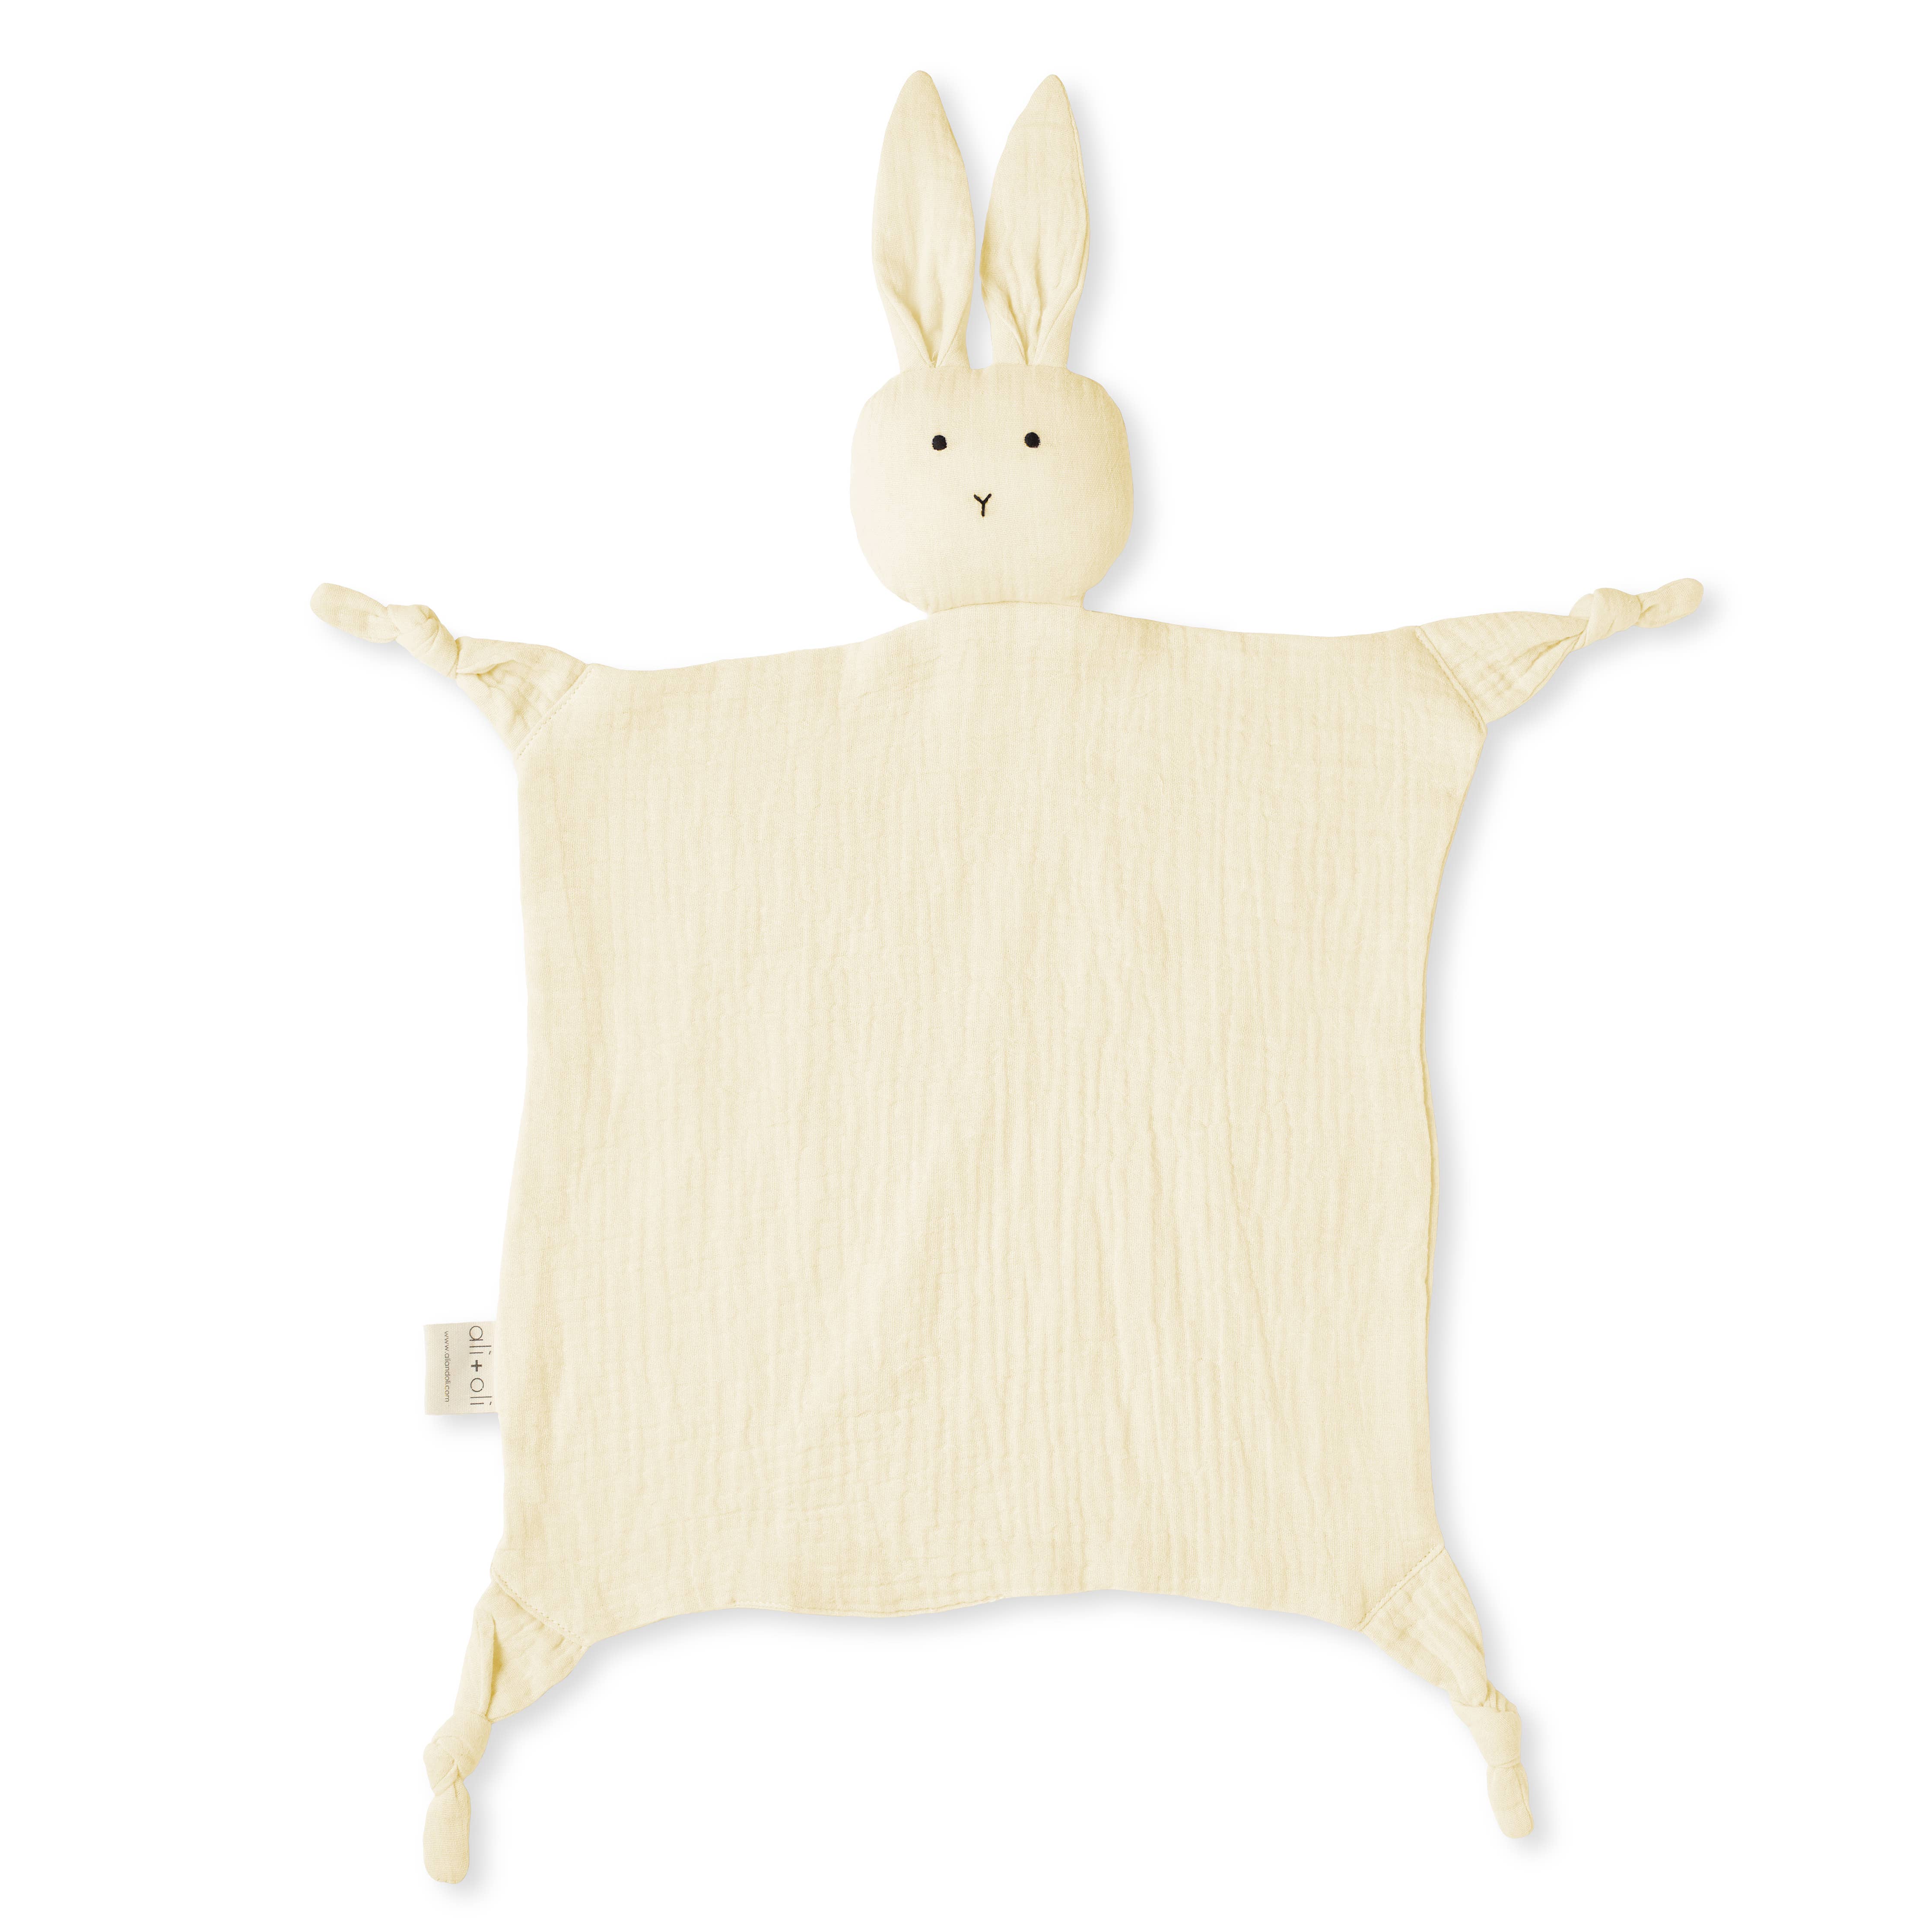 Cuddle Security Blanket Soft Muslin Cotton - Bunny (Natural)